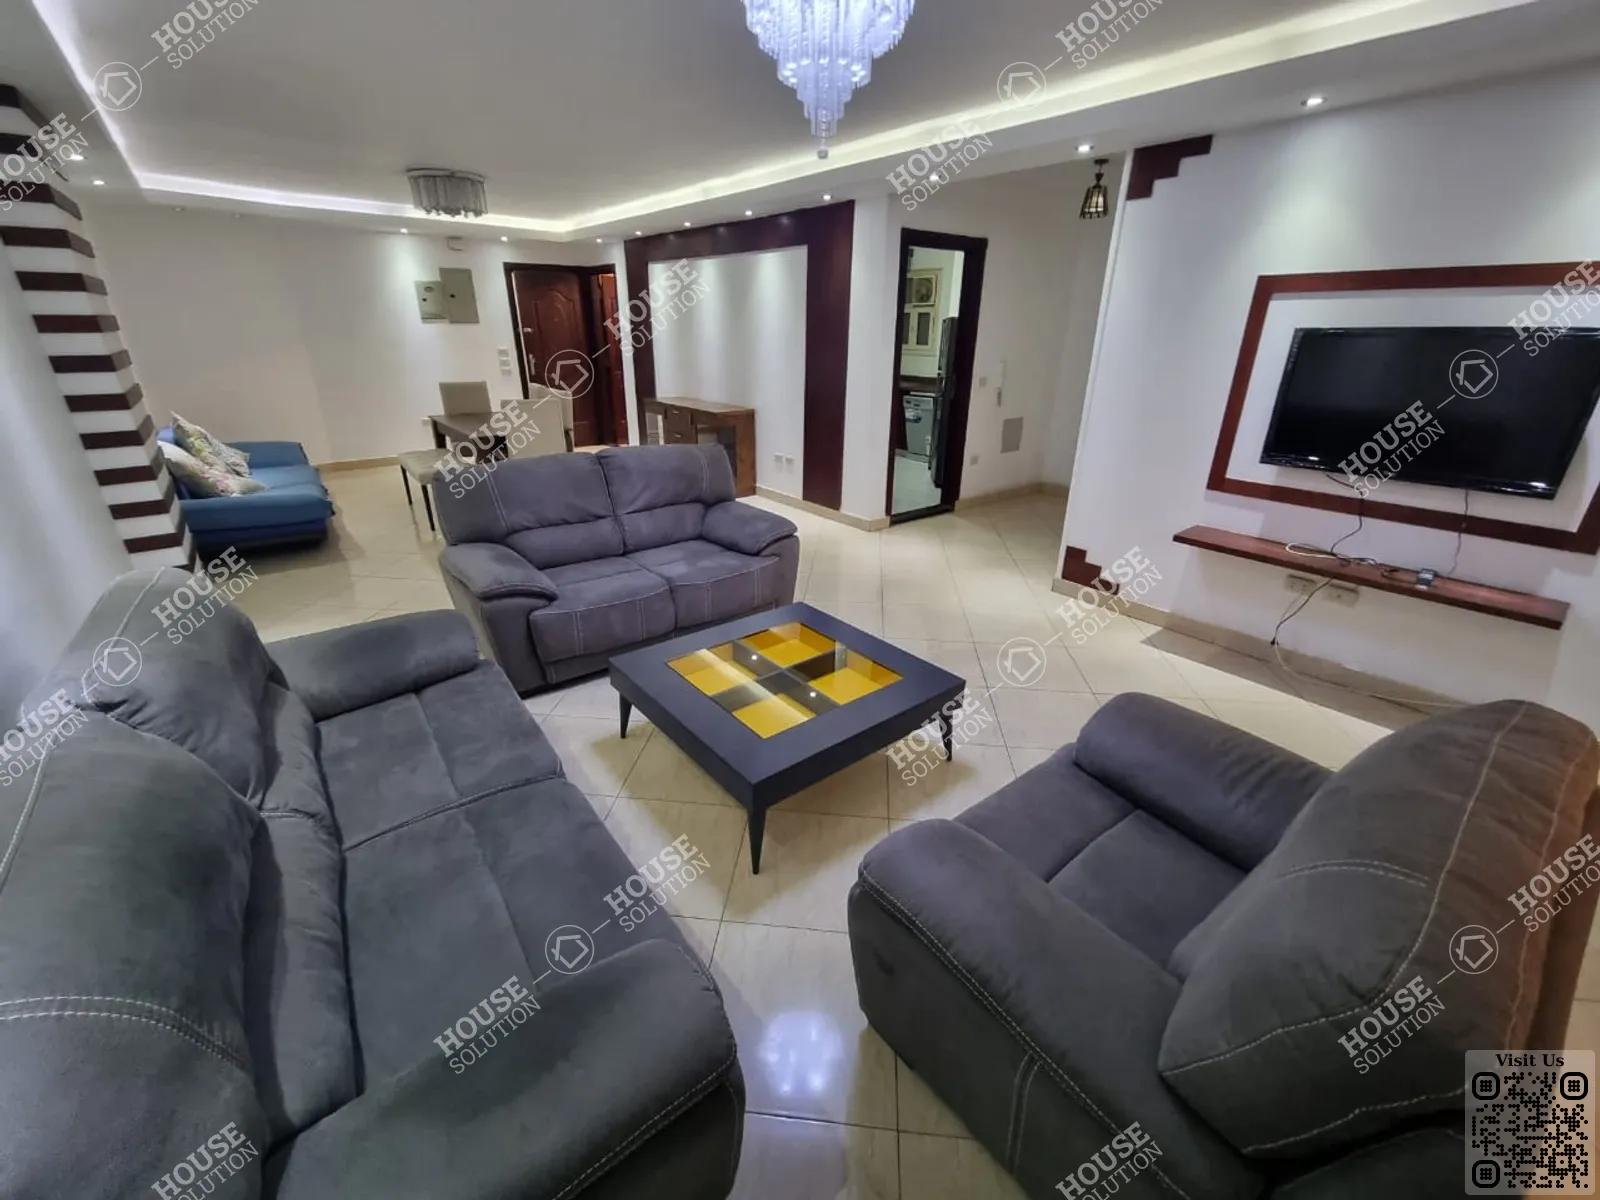 RECEPTION  @ Apartments For Rent In Maadi Maadi Sarayat Area: 200 m² consists of 3 Bedrooms 2 Bathrooms Modern furnished 4 stars #5200-0